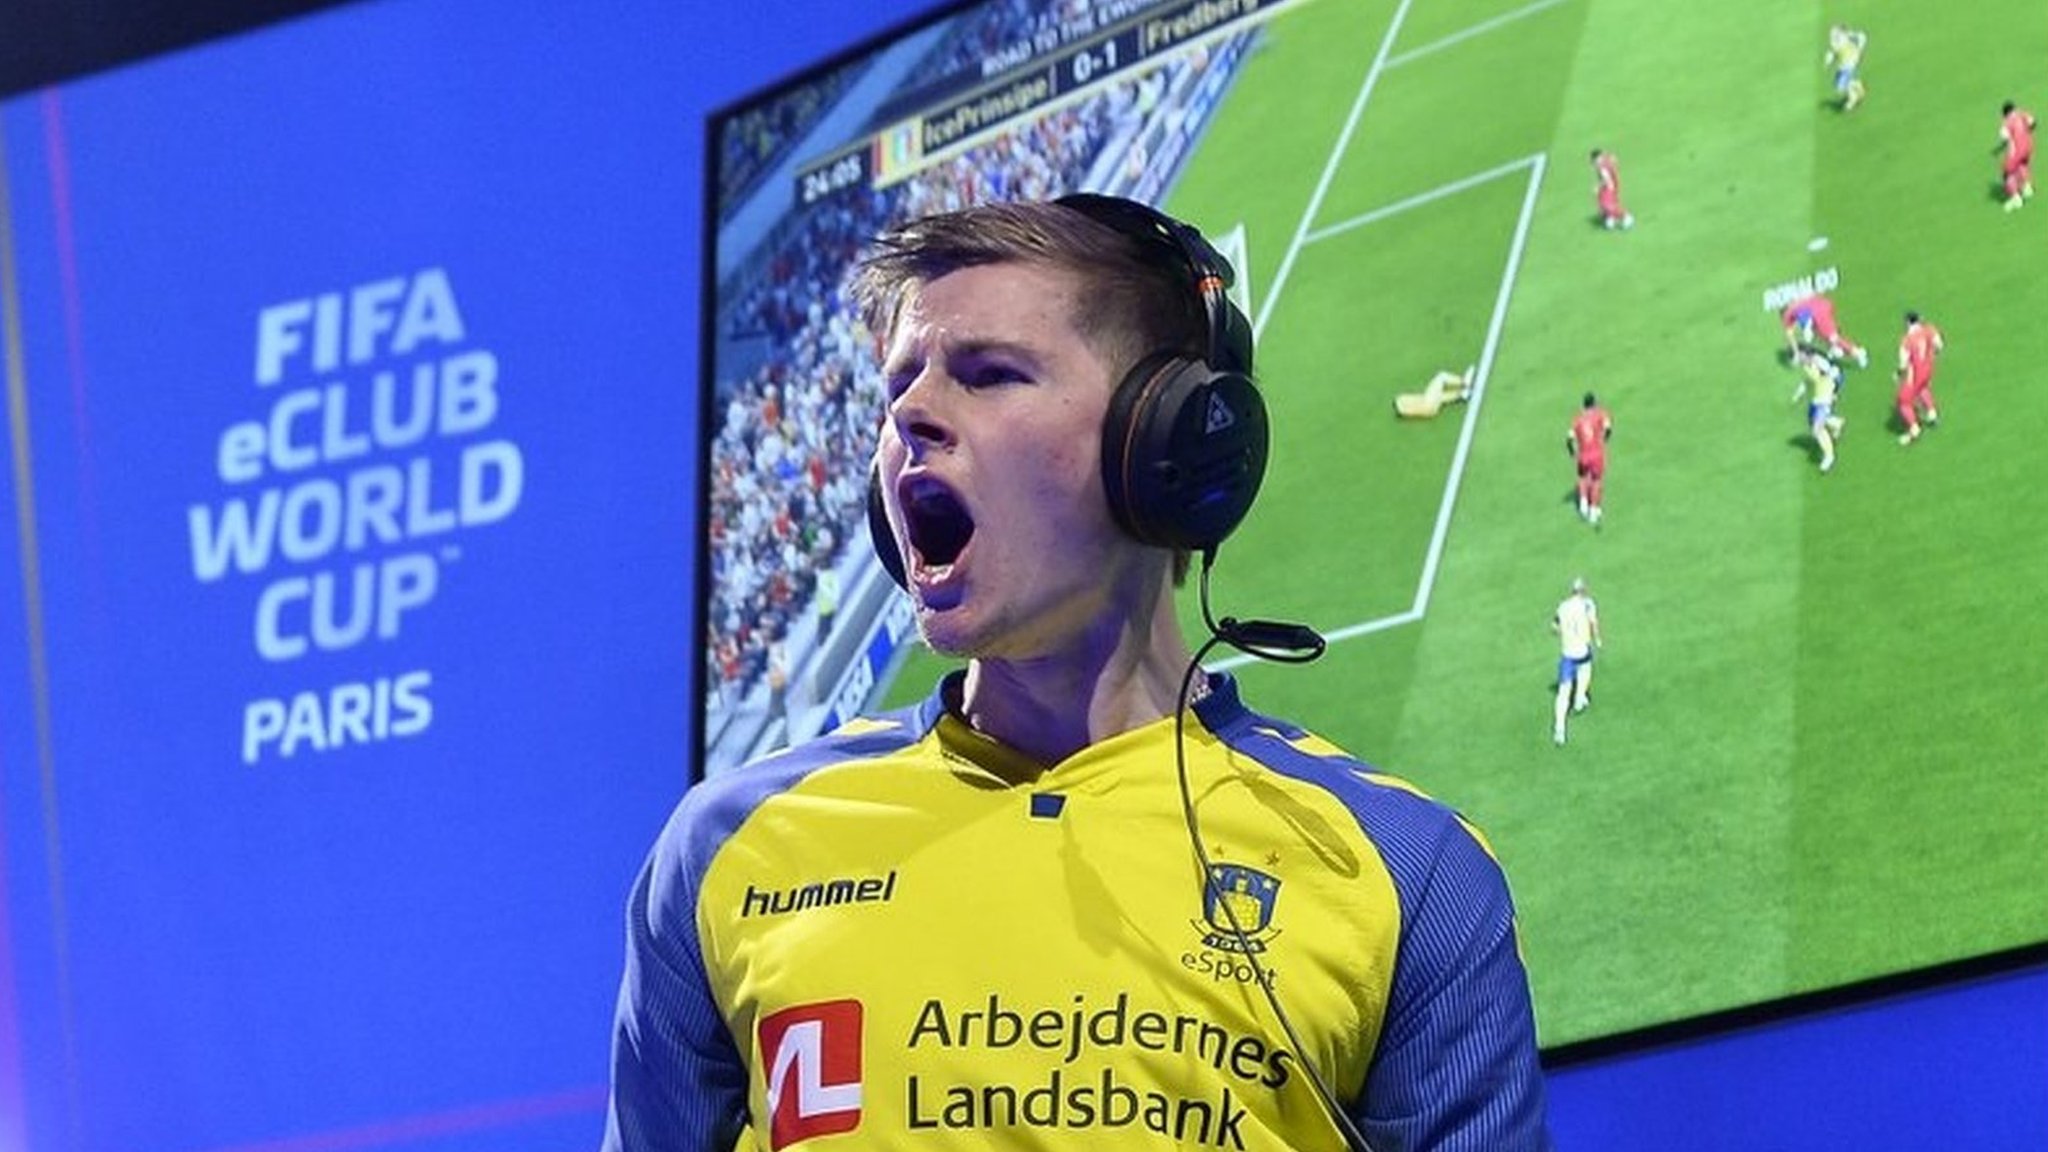 The Danish side conquering the esports world 18 months after they formed